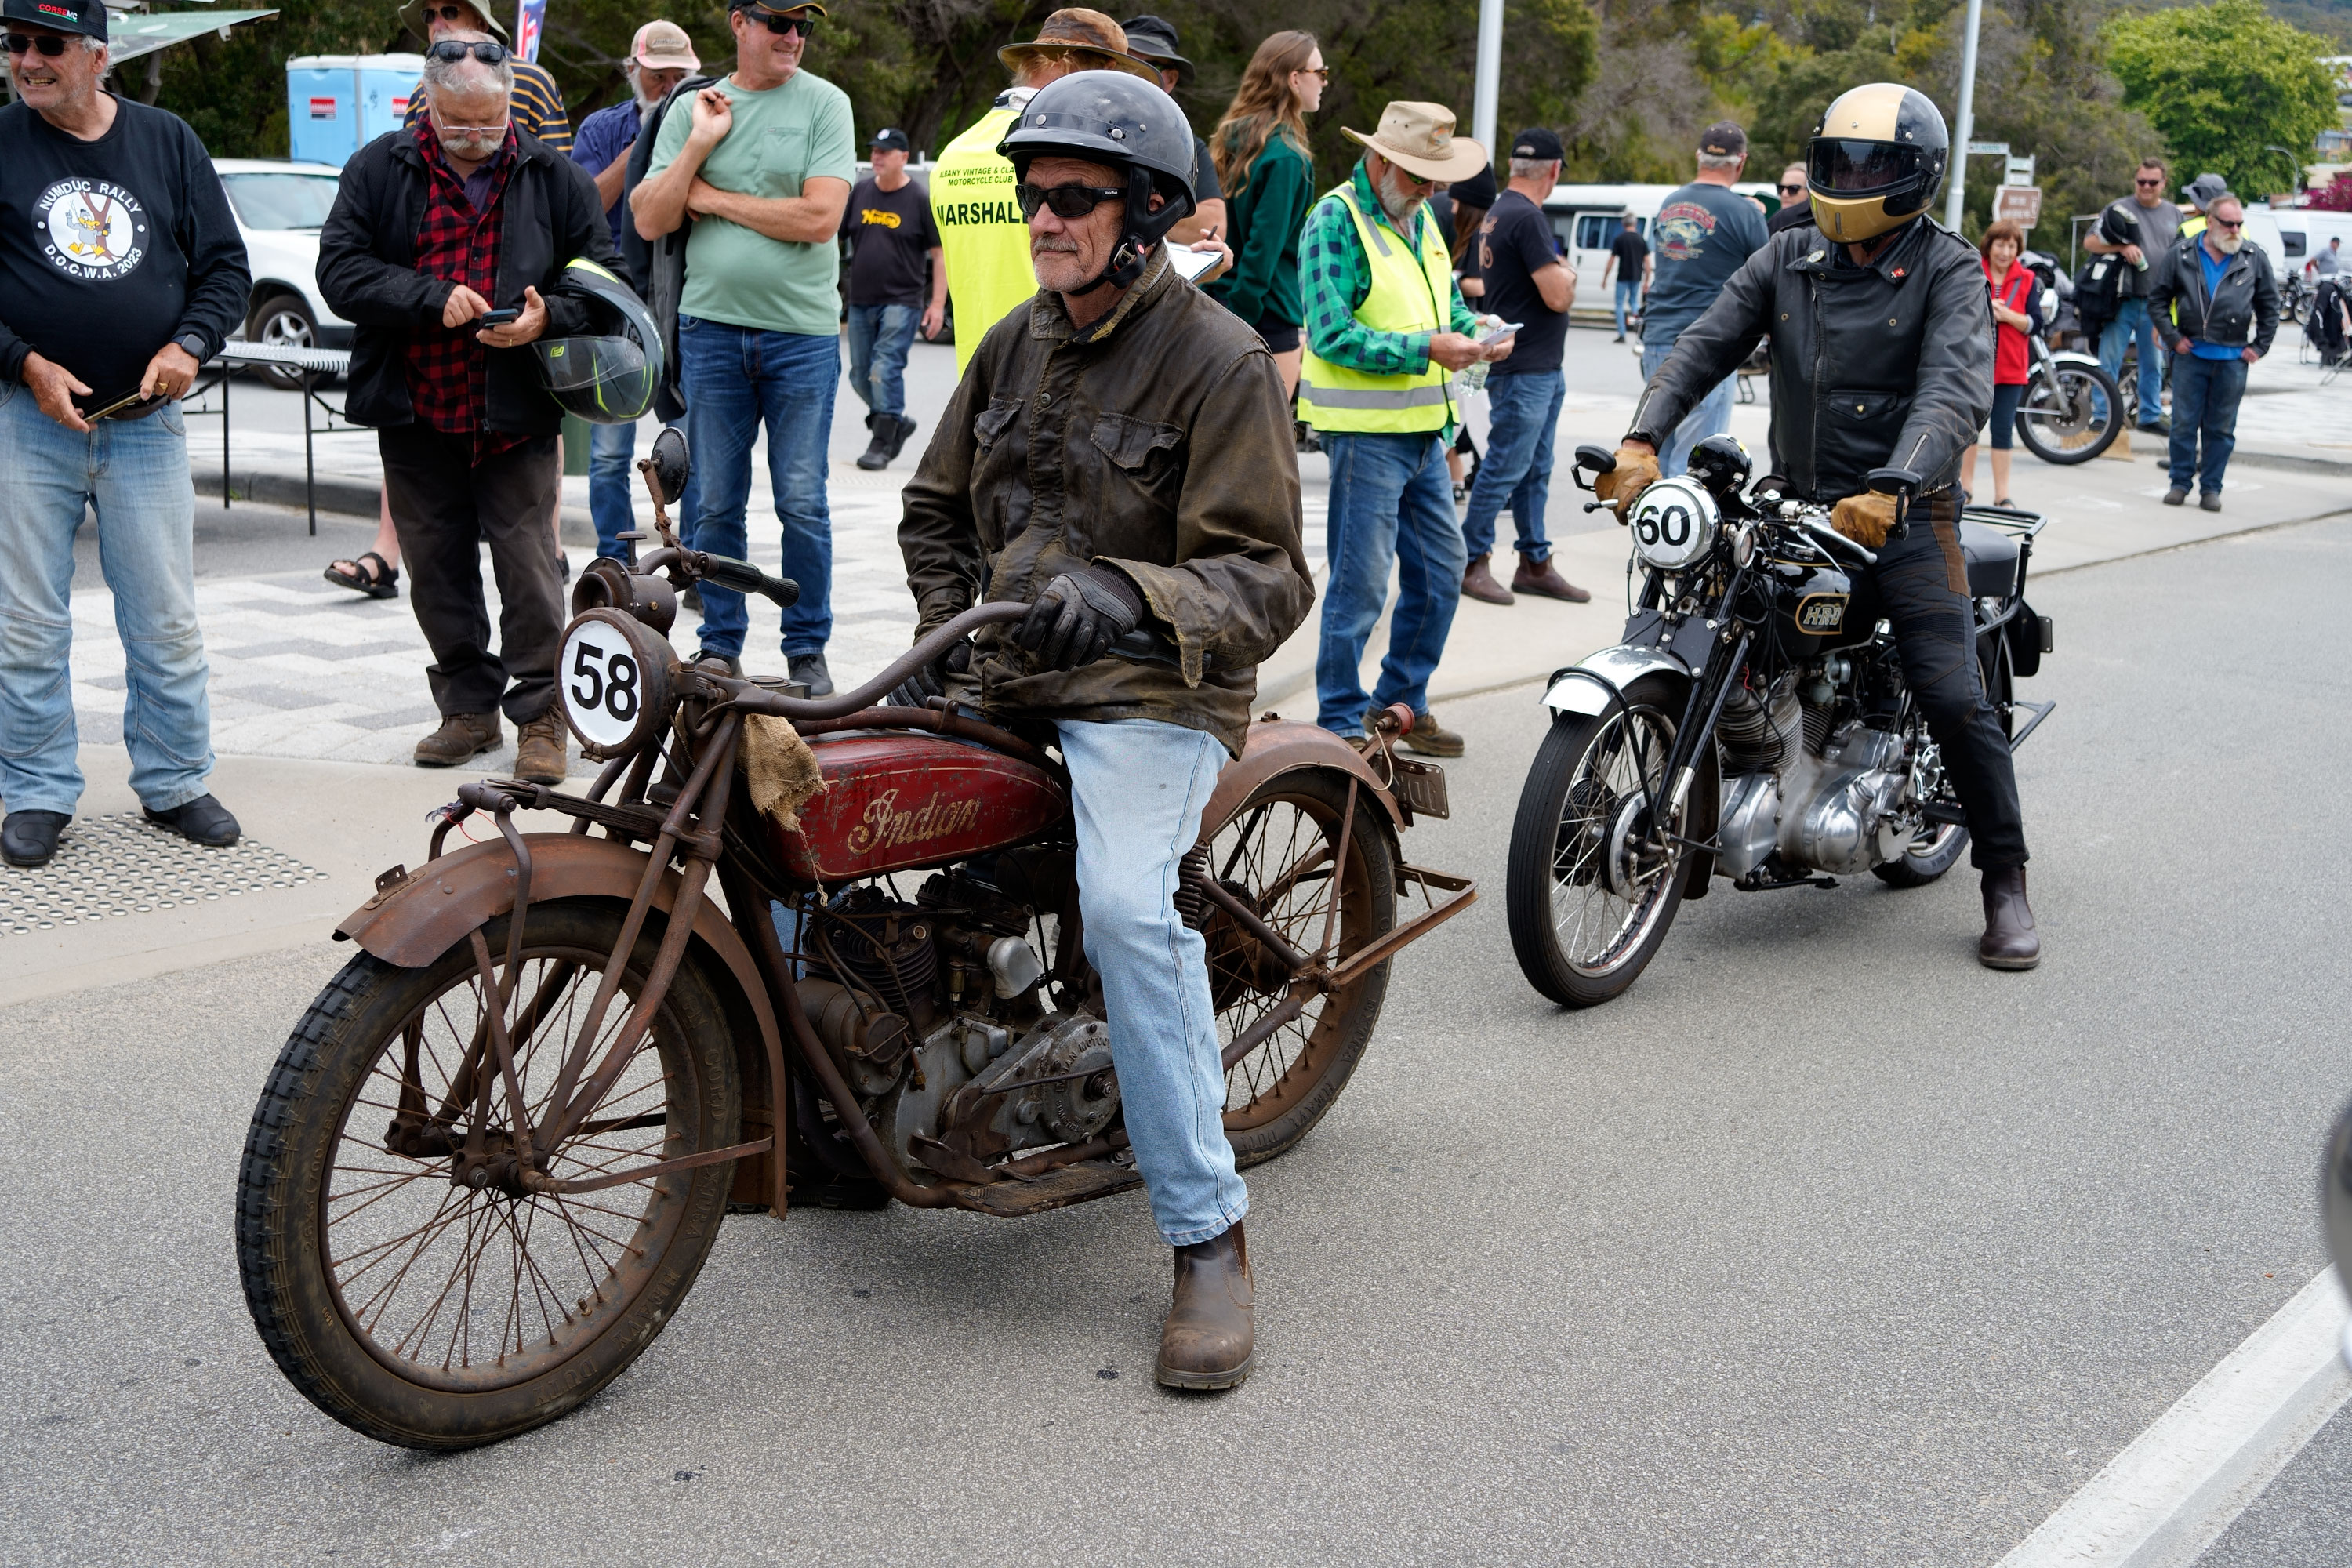 Overall hillclimb time trial winner Glen and his 1966 Indian wait on the grid.